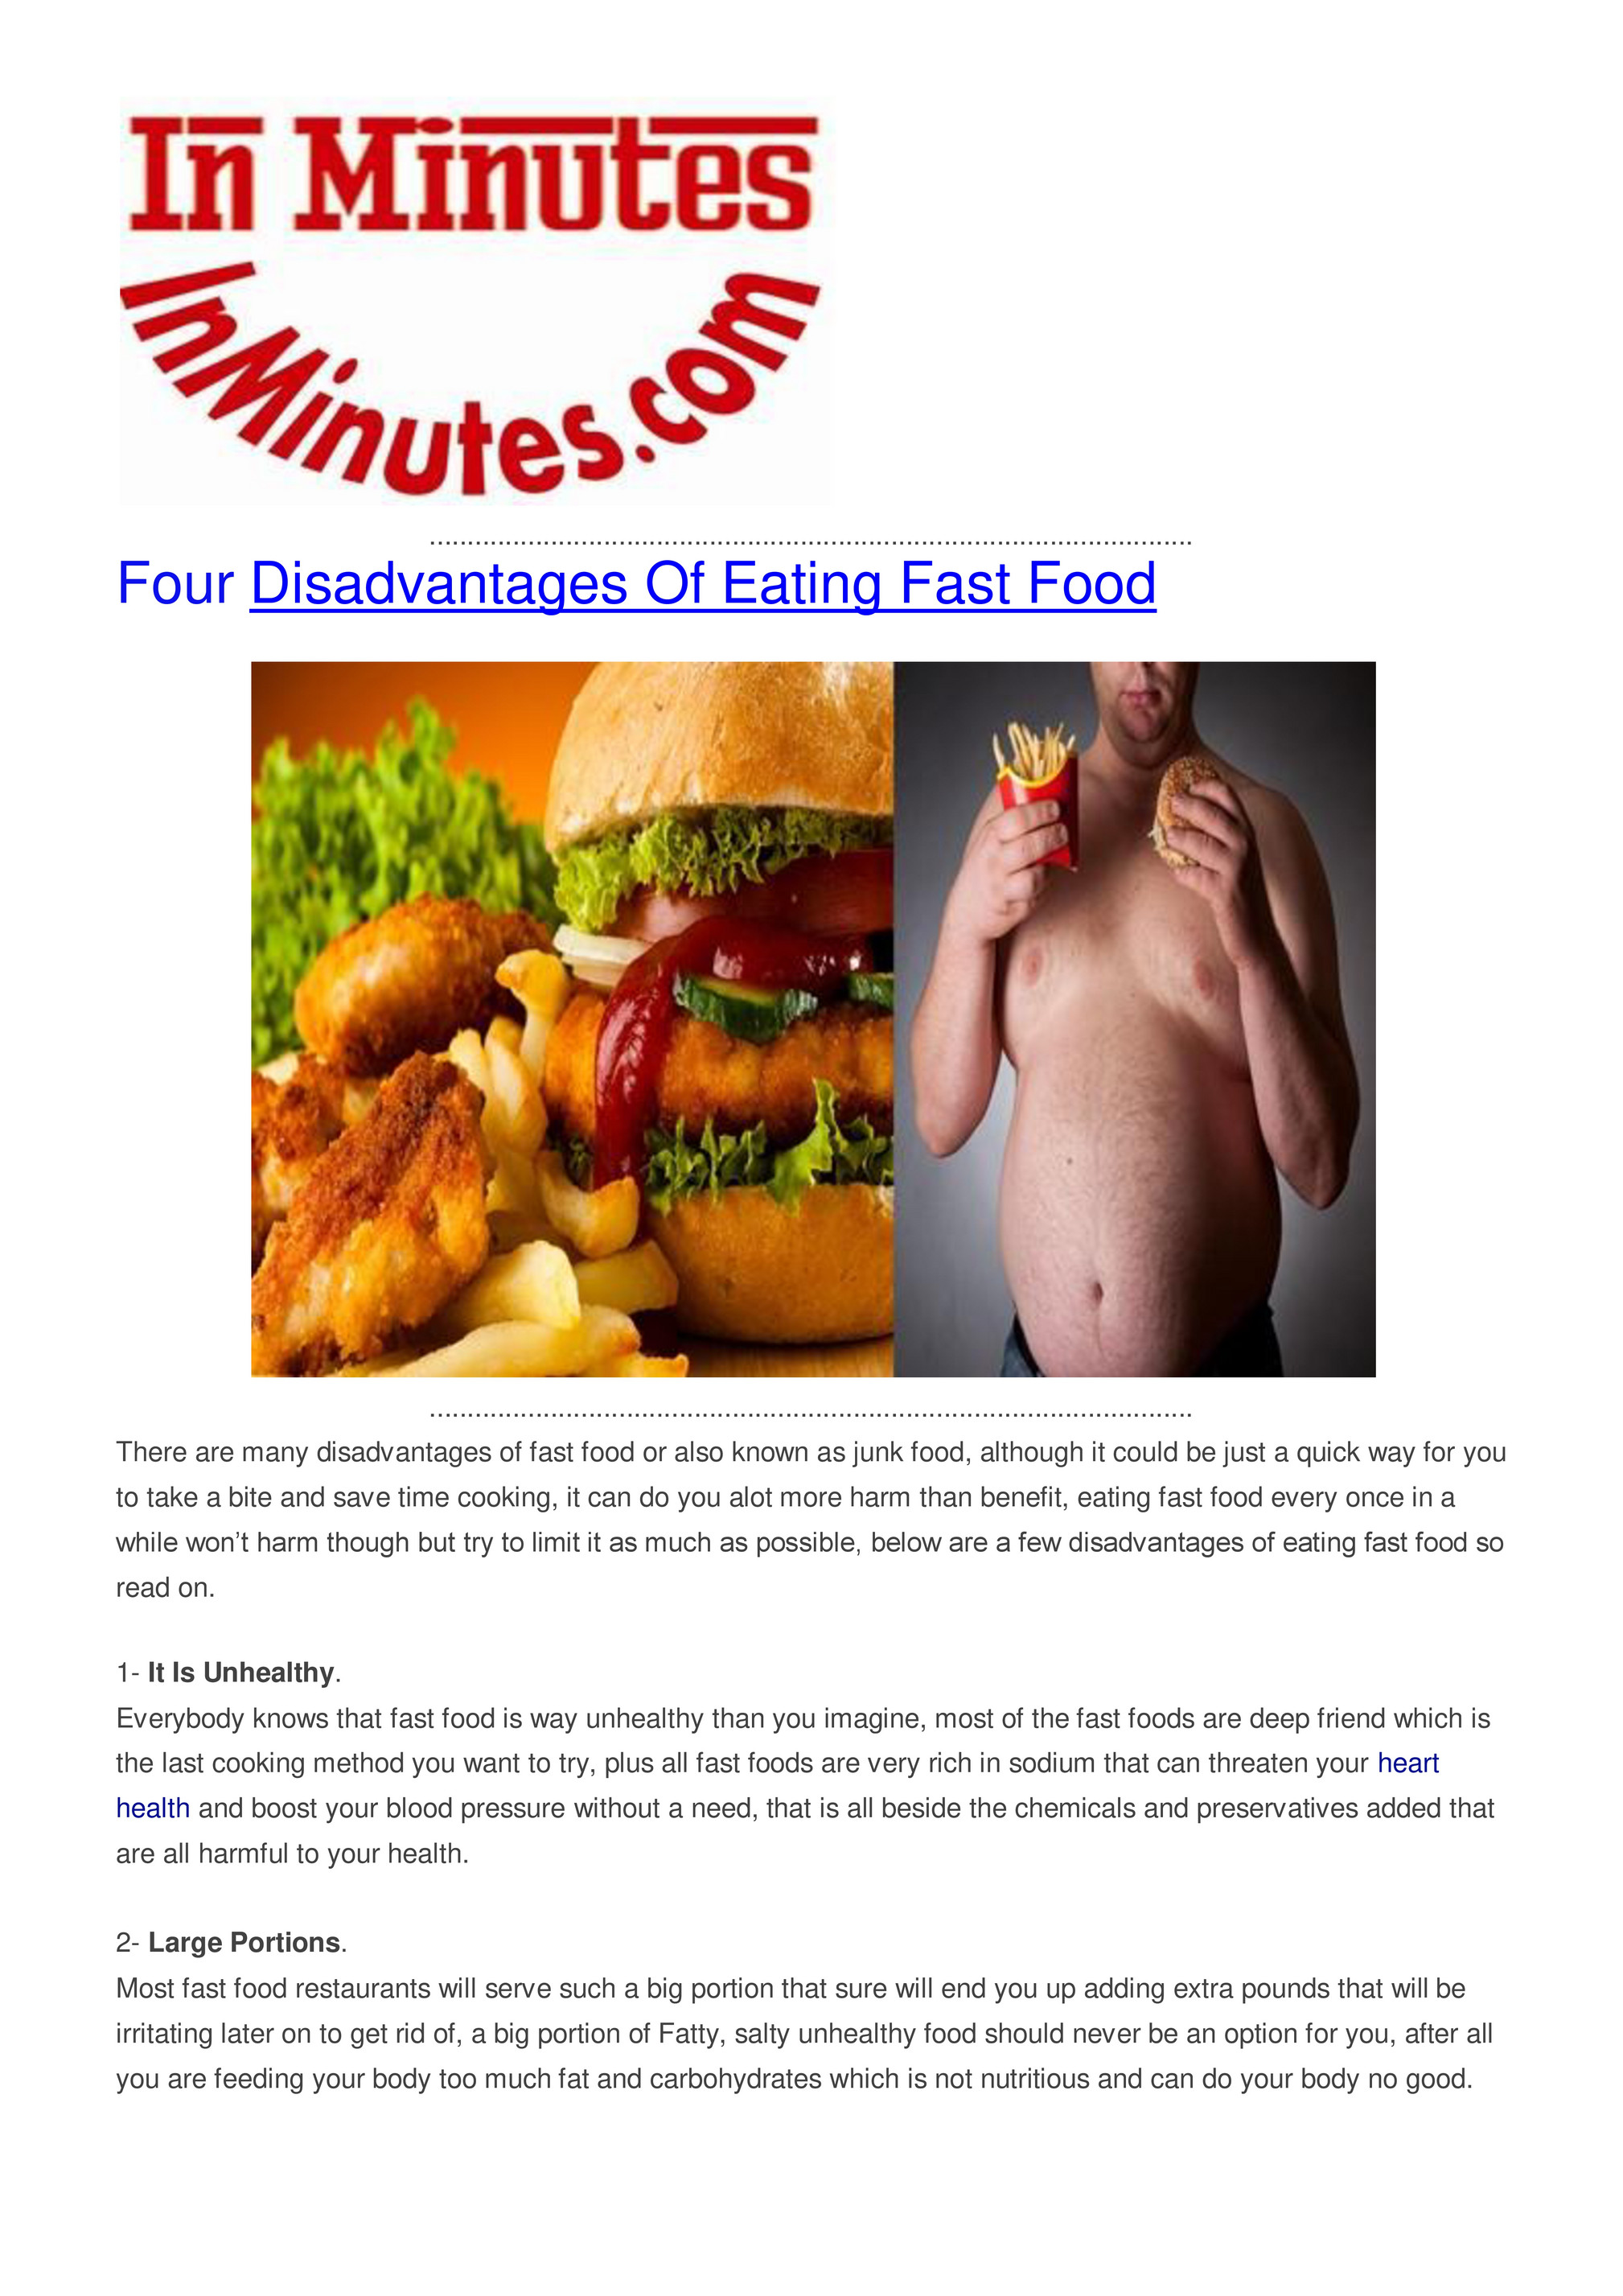 negative effects of eating fast food